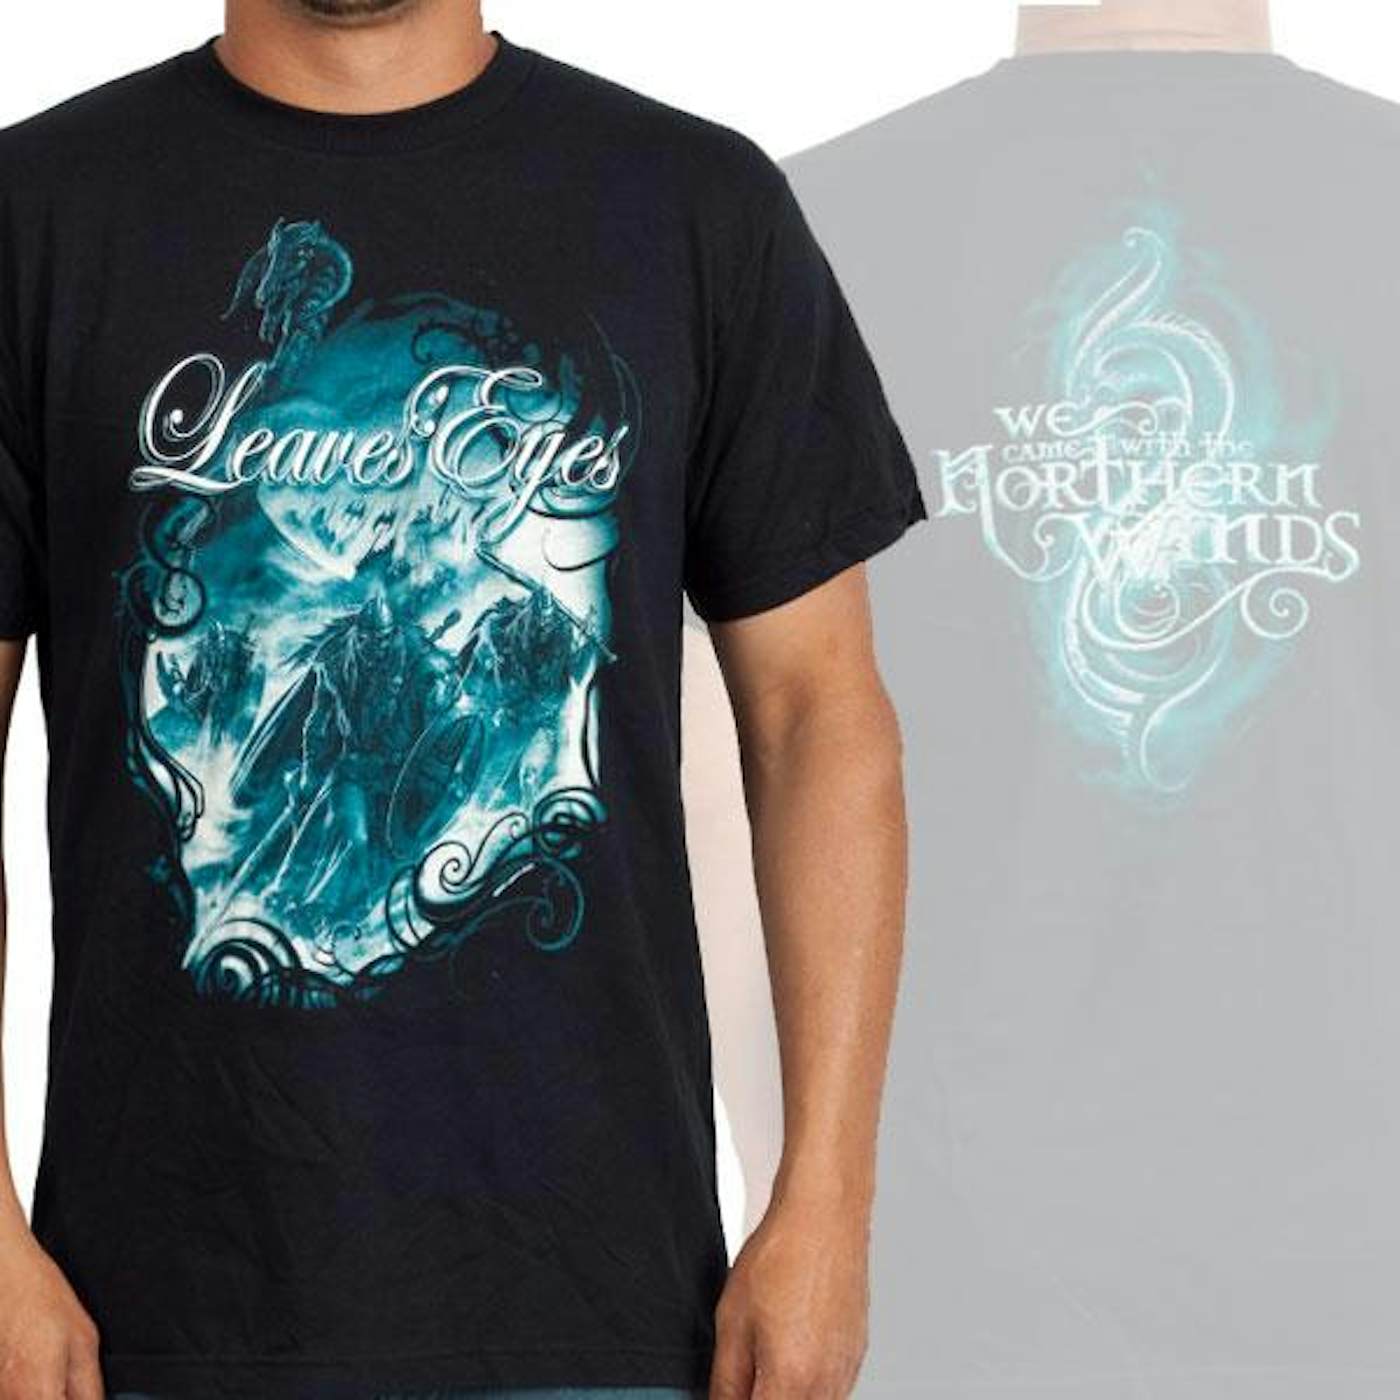 Leaves' Eyes "Northern Winds" T-Shirt